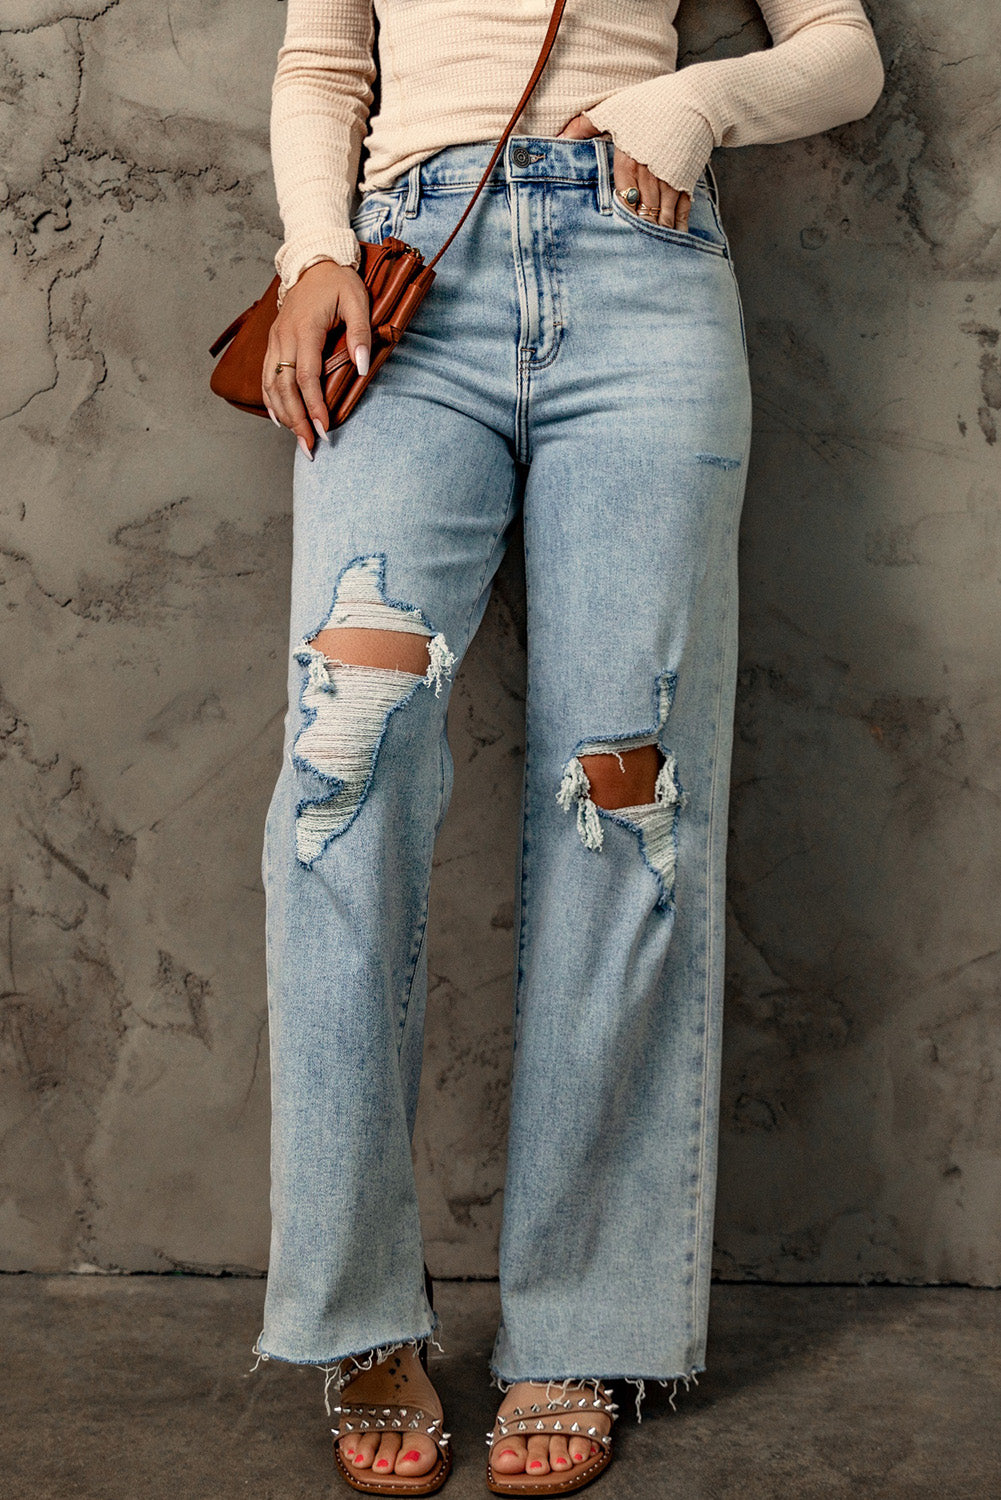 A pair of blue vintage-style jeans with a frayed hem, multiple holes, and a straight, loose-fitting silhouette